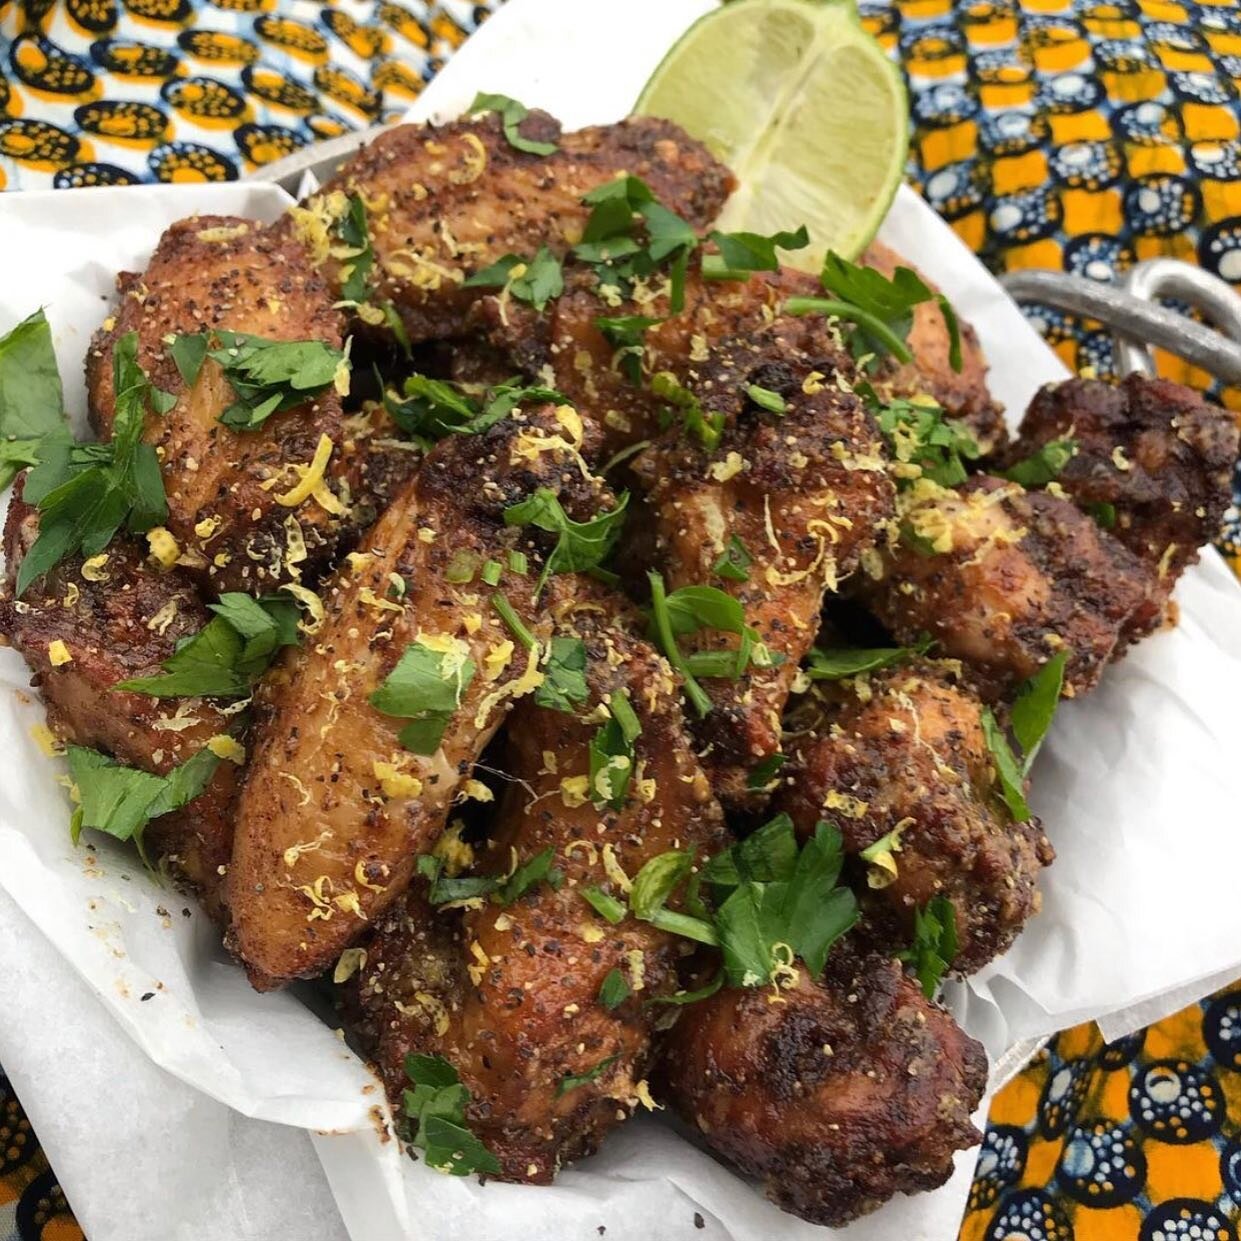 ROASTED GARLIC SMOKY LEMON PEPPER WINGS  Life giving lemon pepper wings! 🍋🐔 ⬅️Swipe for recipe or check out the link in Bio...
.
Yield: 5-6 servings
.
.
.
#TasteTutor #Chef #Catering #Food #Cooking #QuarantineEats #Culinary #Cuisine #Recipe #Taste 